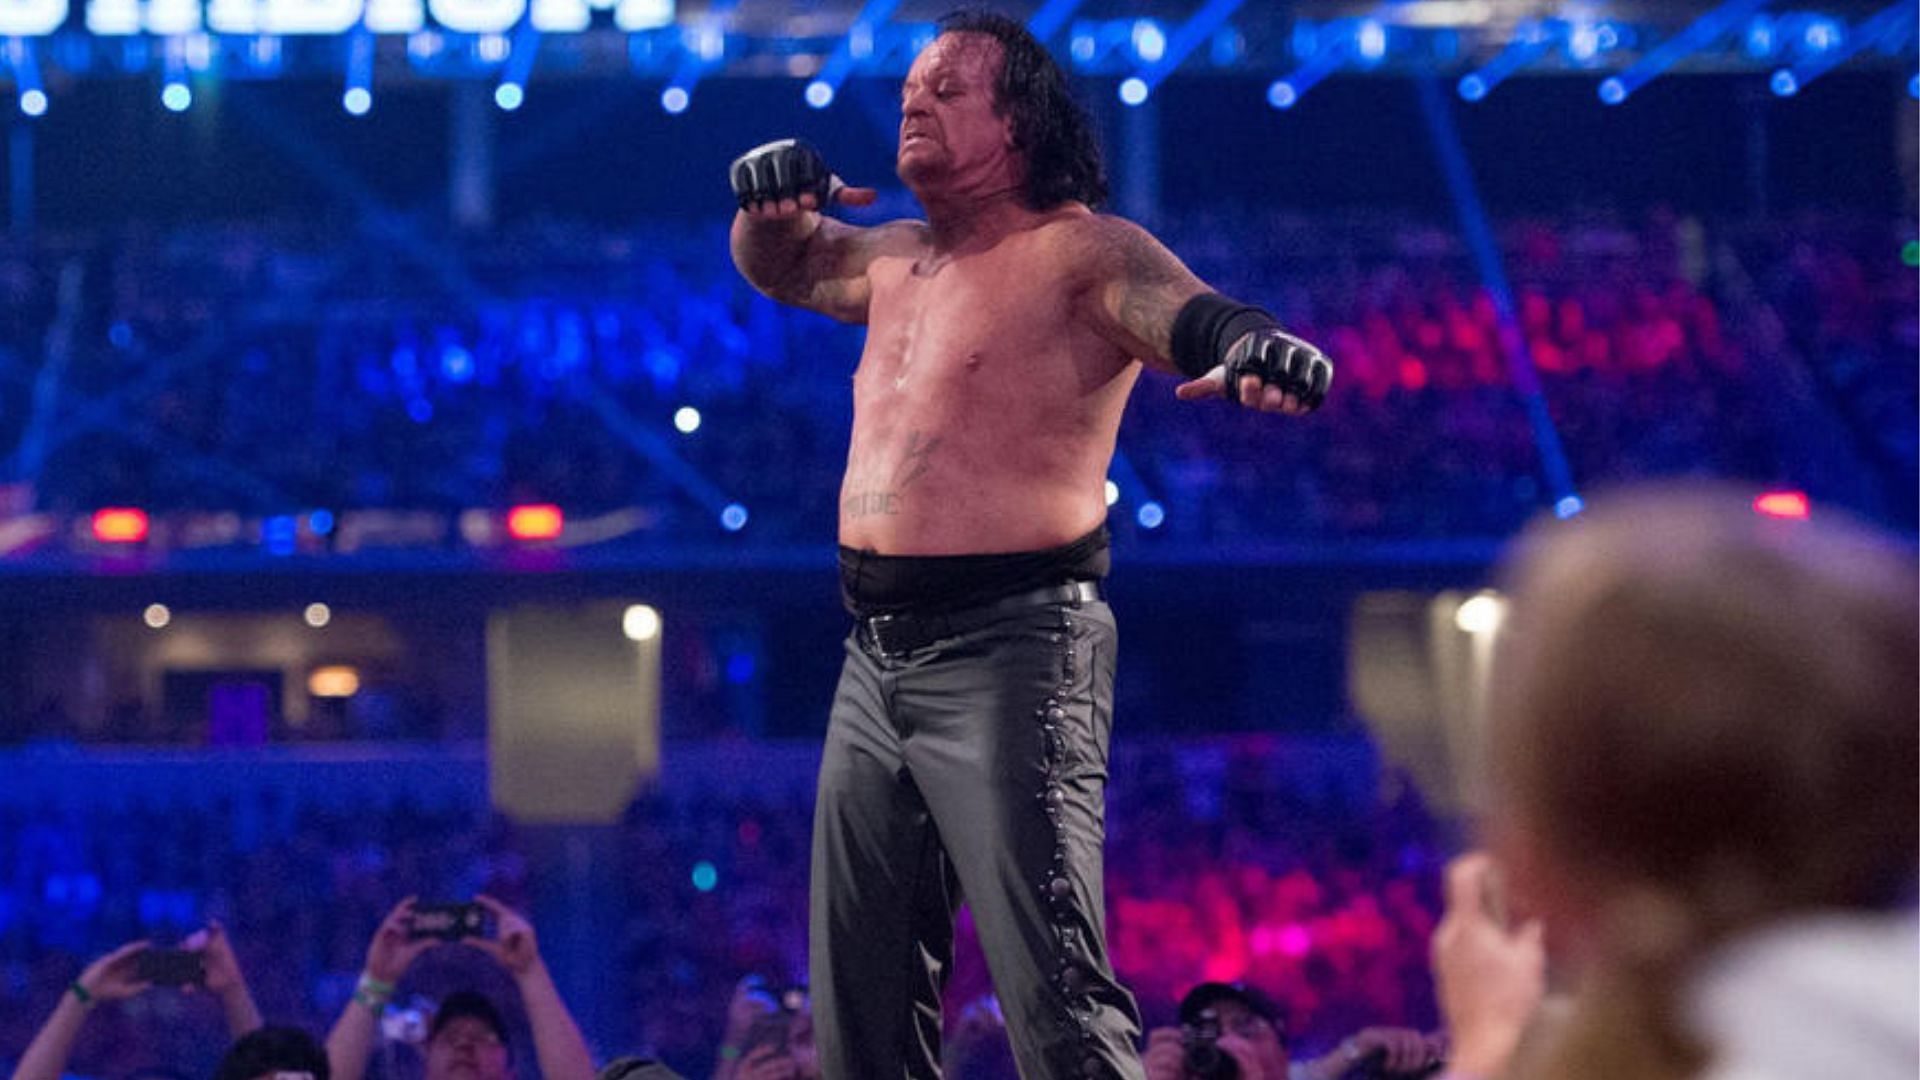 The Undertaker preparing to give his finisher.